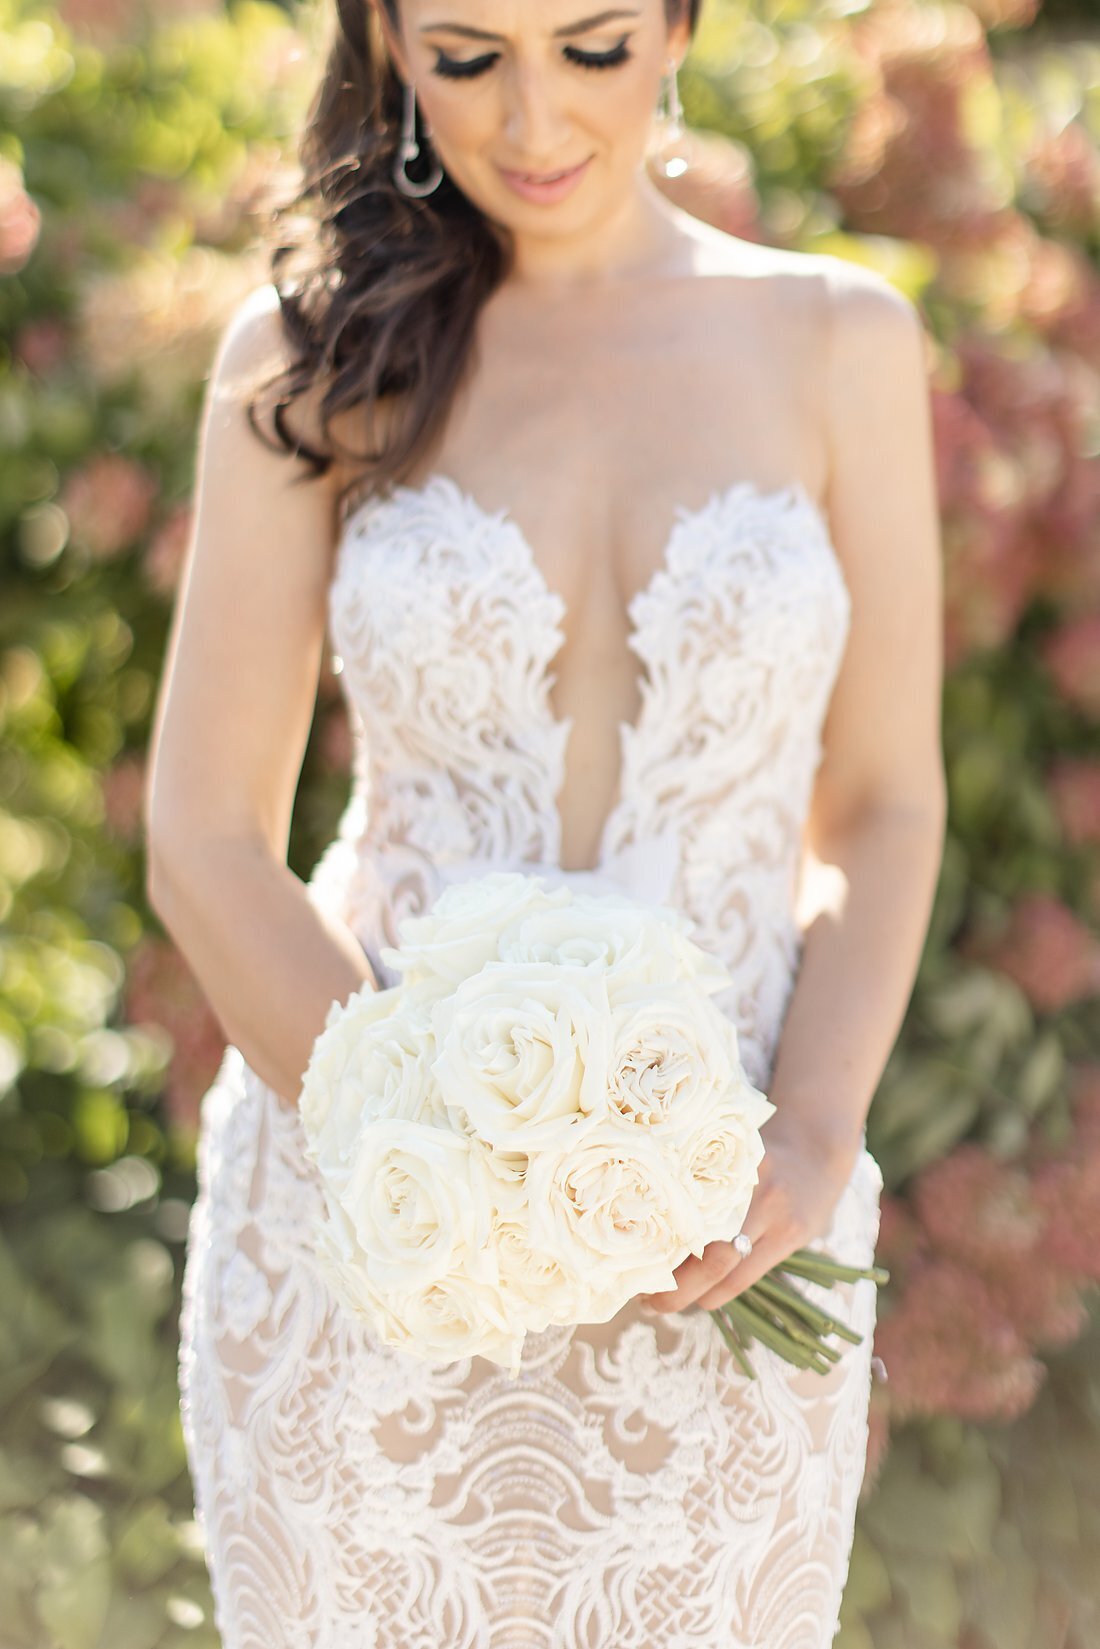 Stunning-bride-looking-down-at-her-beautiful-white-bouqet-in-her-gorgeous-low-v-wedding-dress